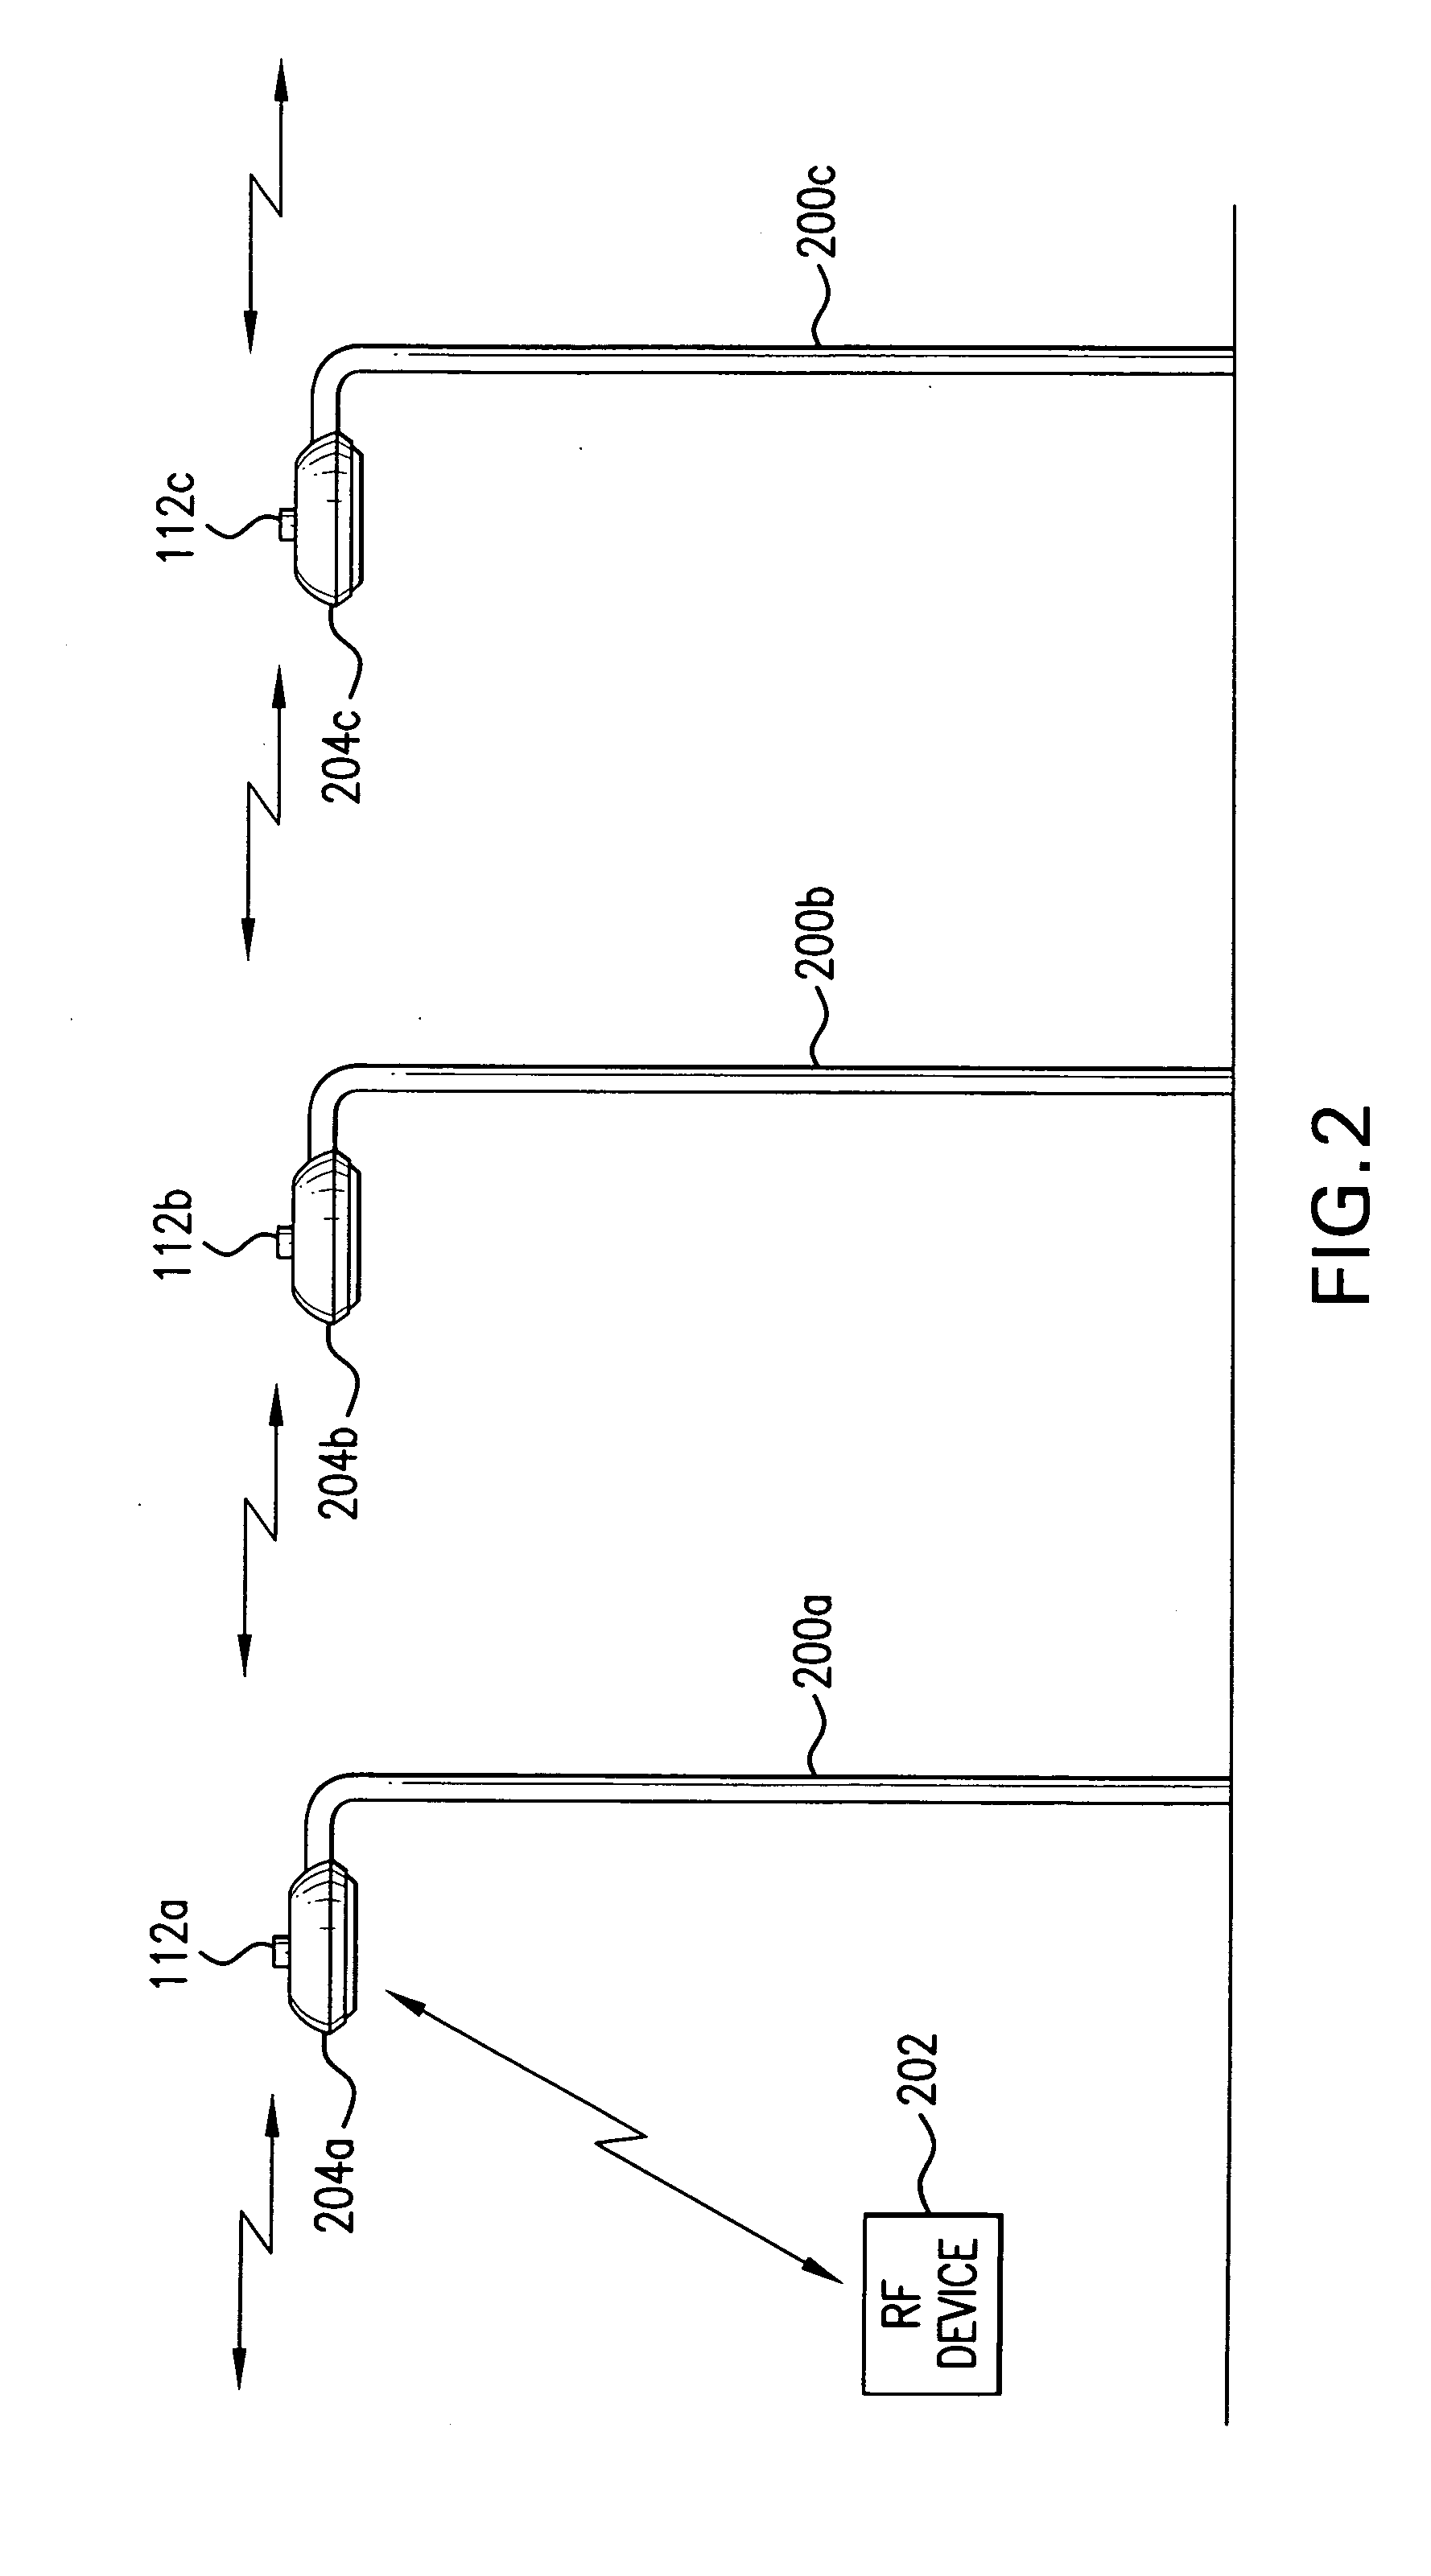 Network operation center for a light management system having networked intelligent luminaire managers